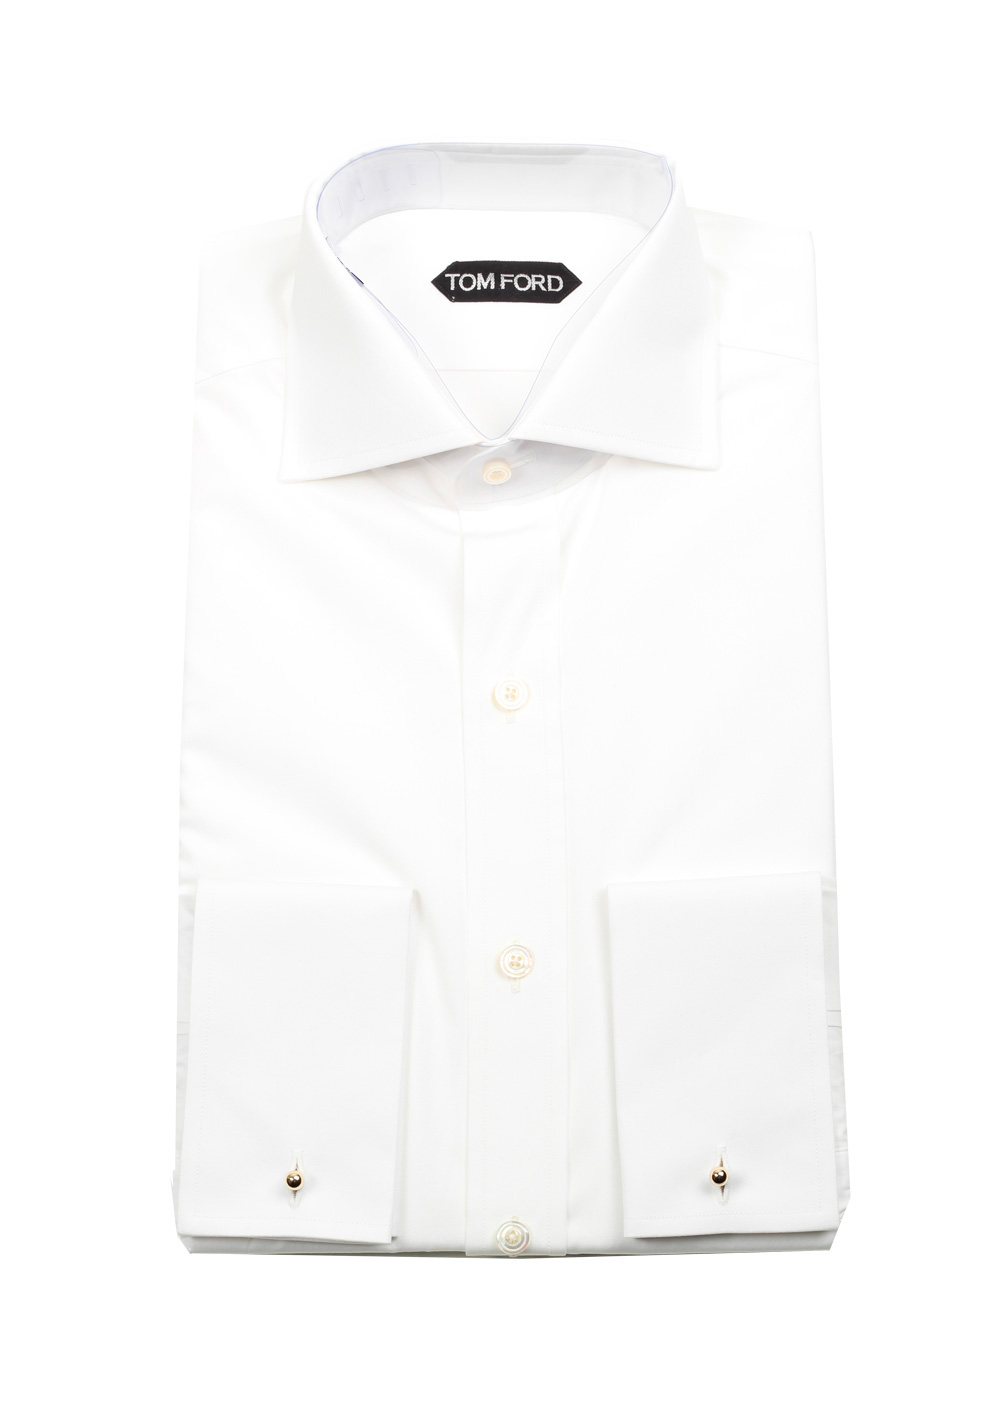 TOM FORD Solid White Dress Shirt Size 39 / 15,5 U.S. | Costume Limité